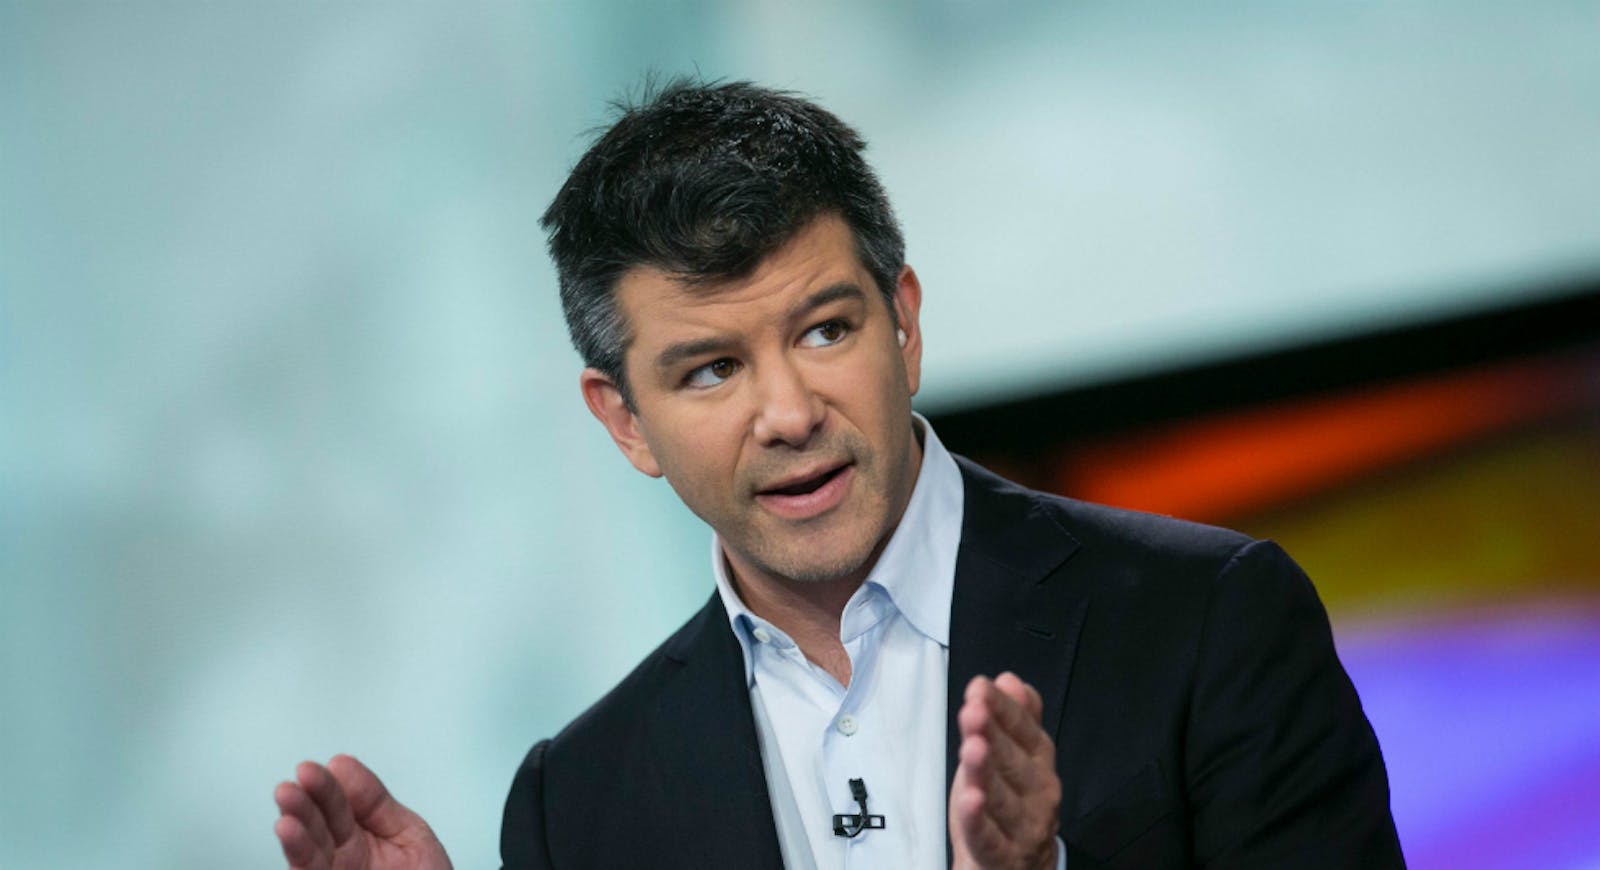 Uber co-founder and CEO Travis Kalanick. Photo by Bloomberg.